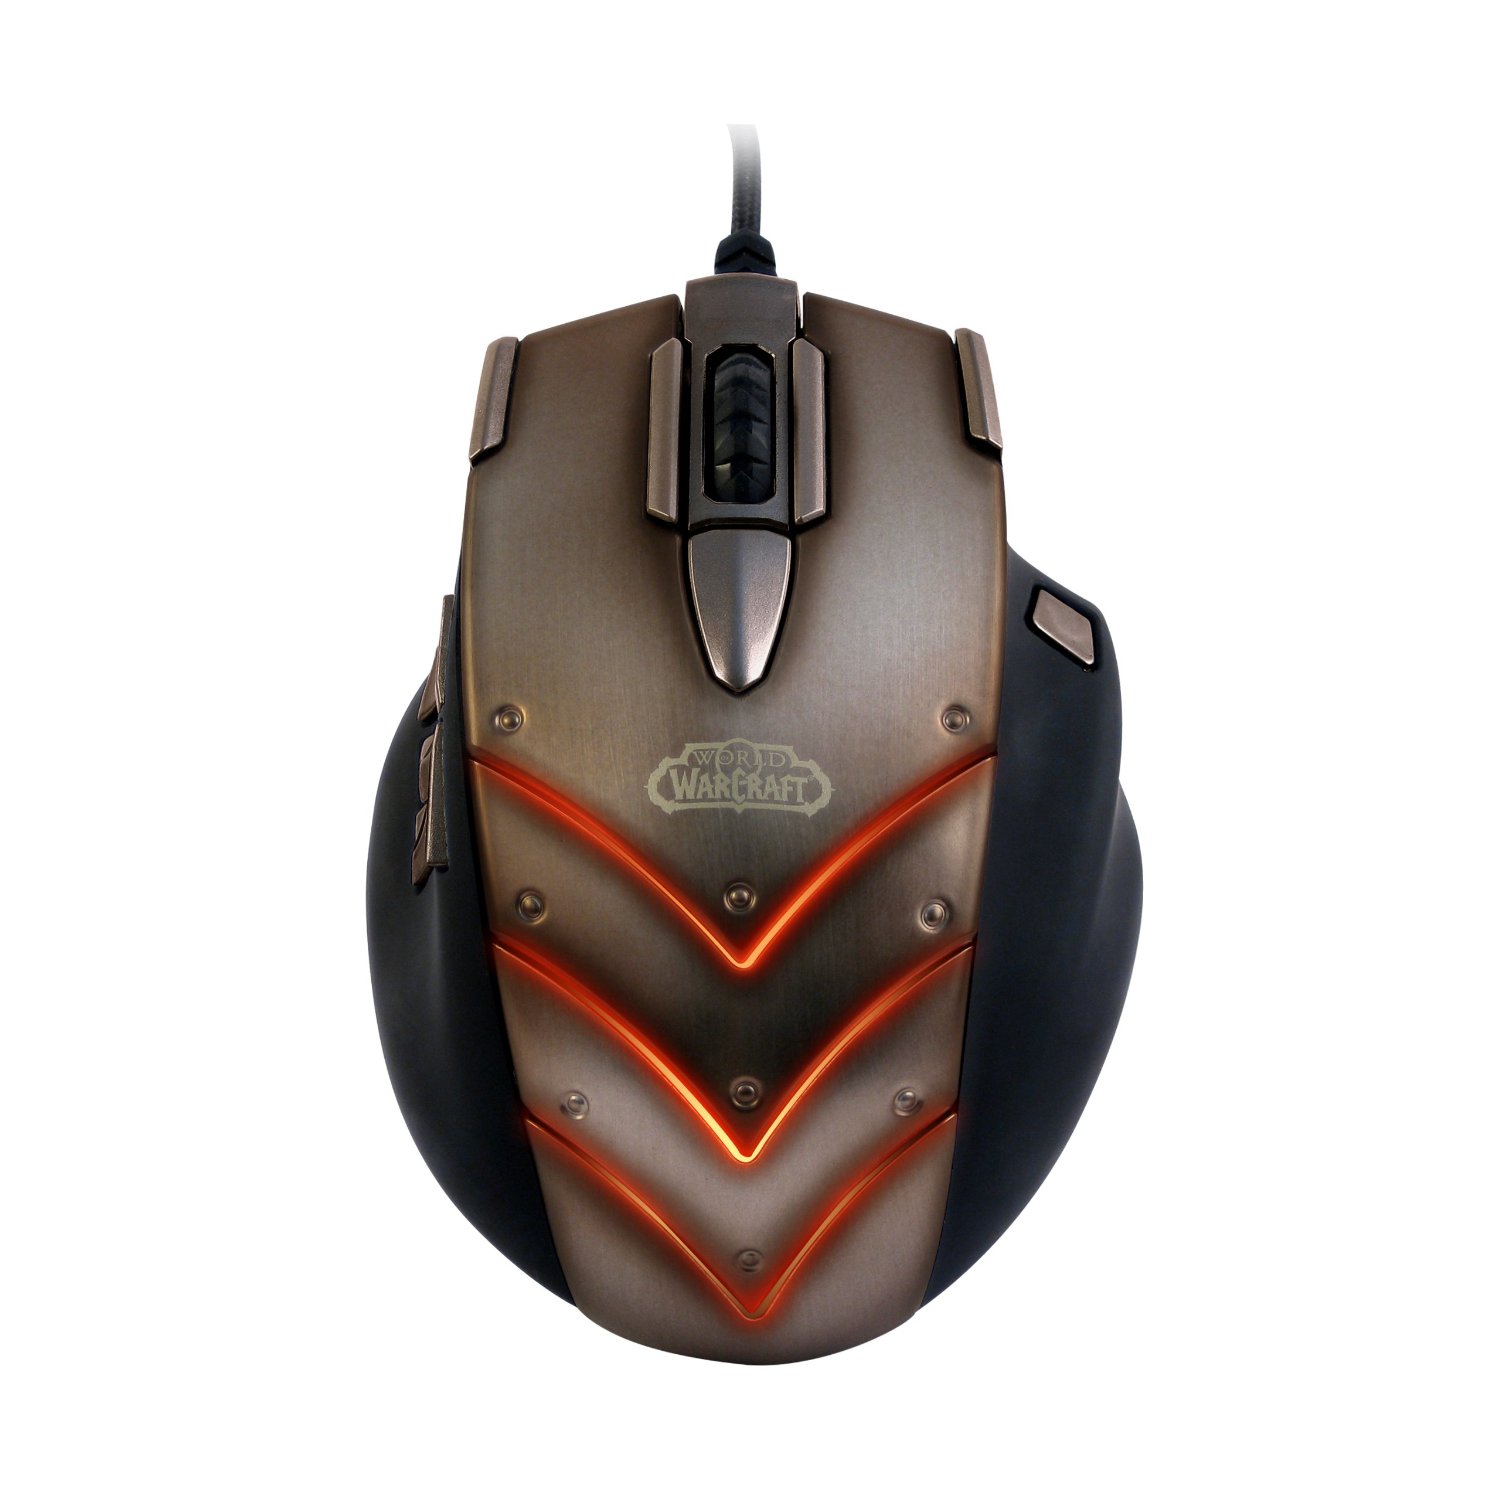 http://thetechjournal.com/wp-content/uploads/images/1202/1329465639-steelseries-world-of-warcraft-cataclysm-mmo-gaming-mouse-3.jpg